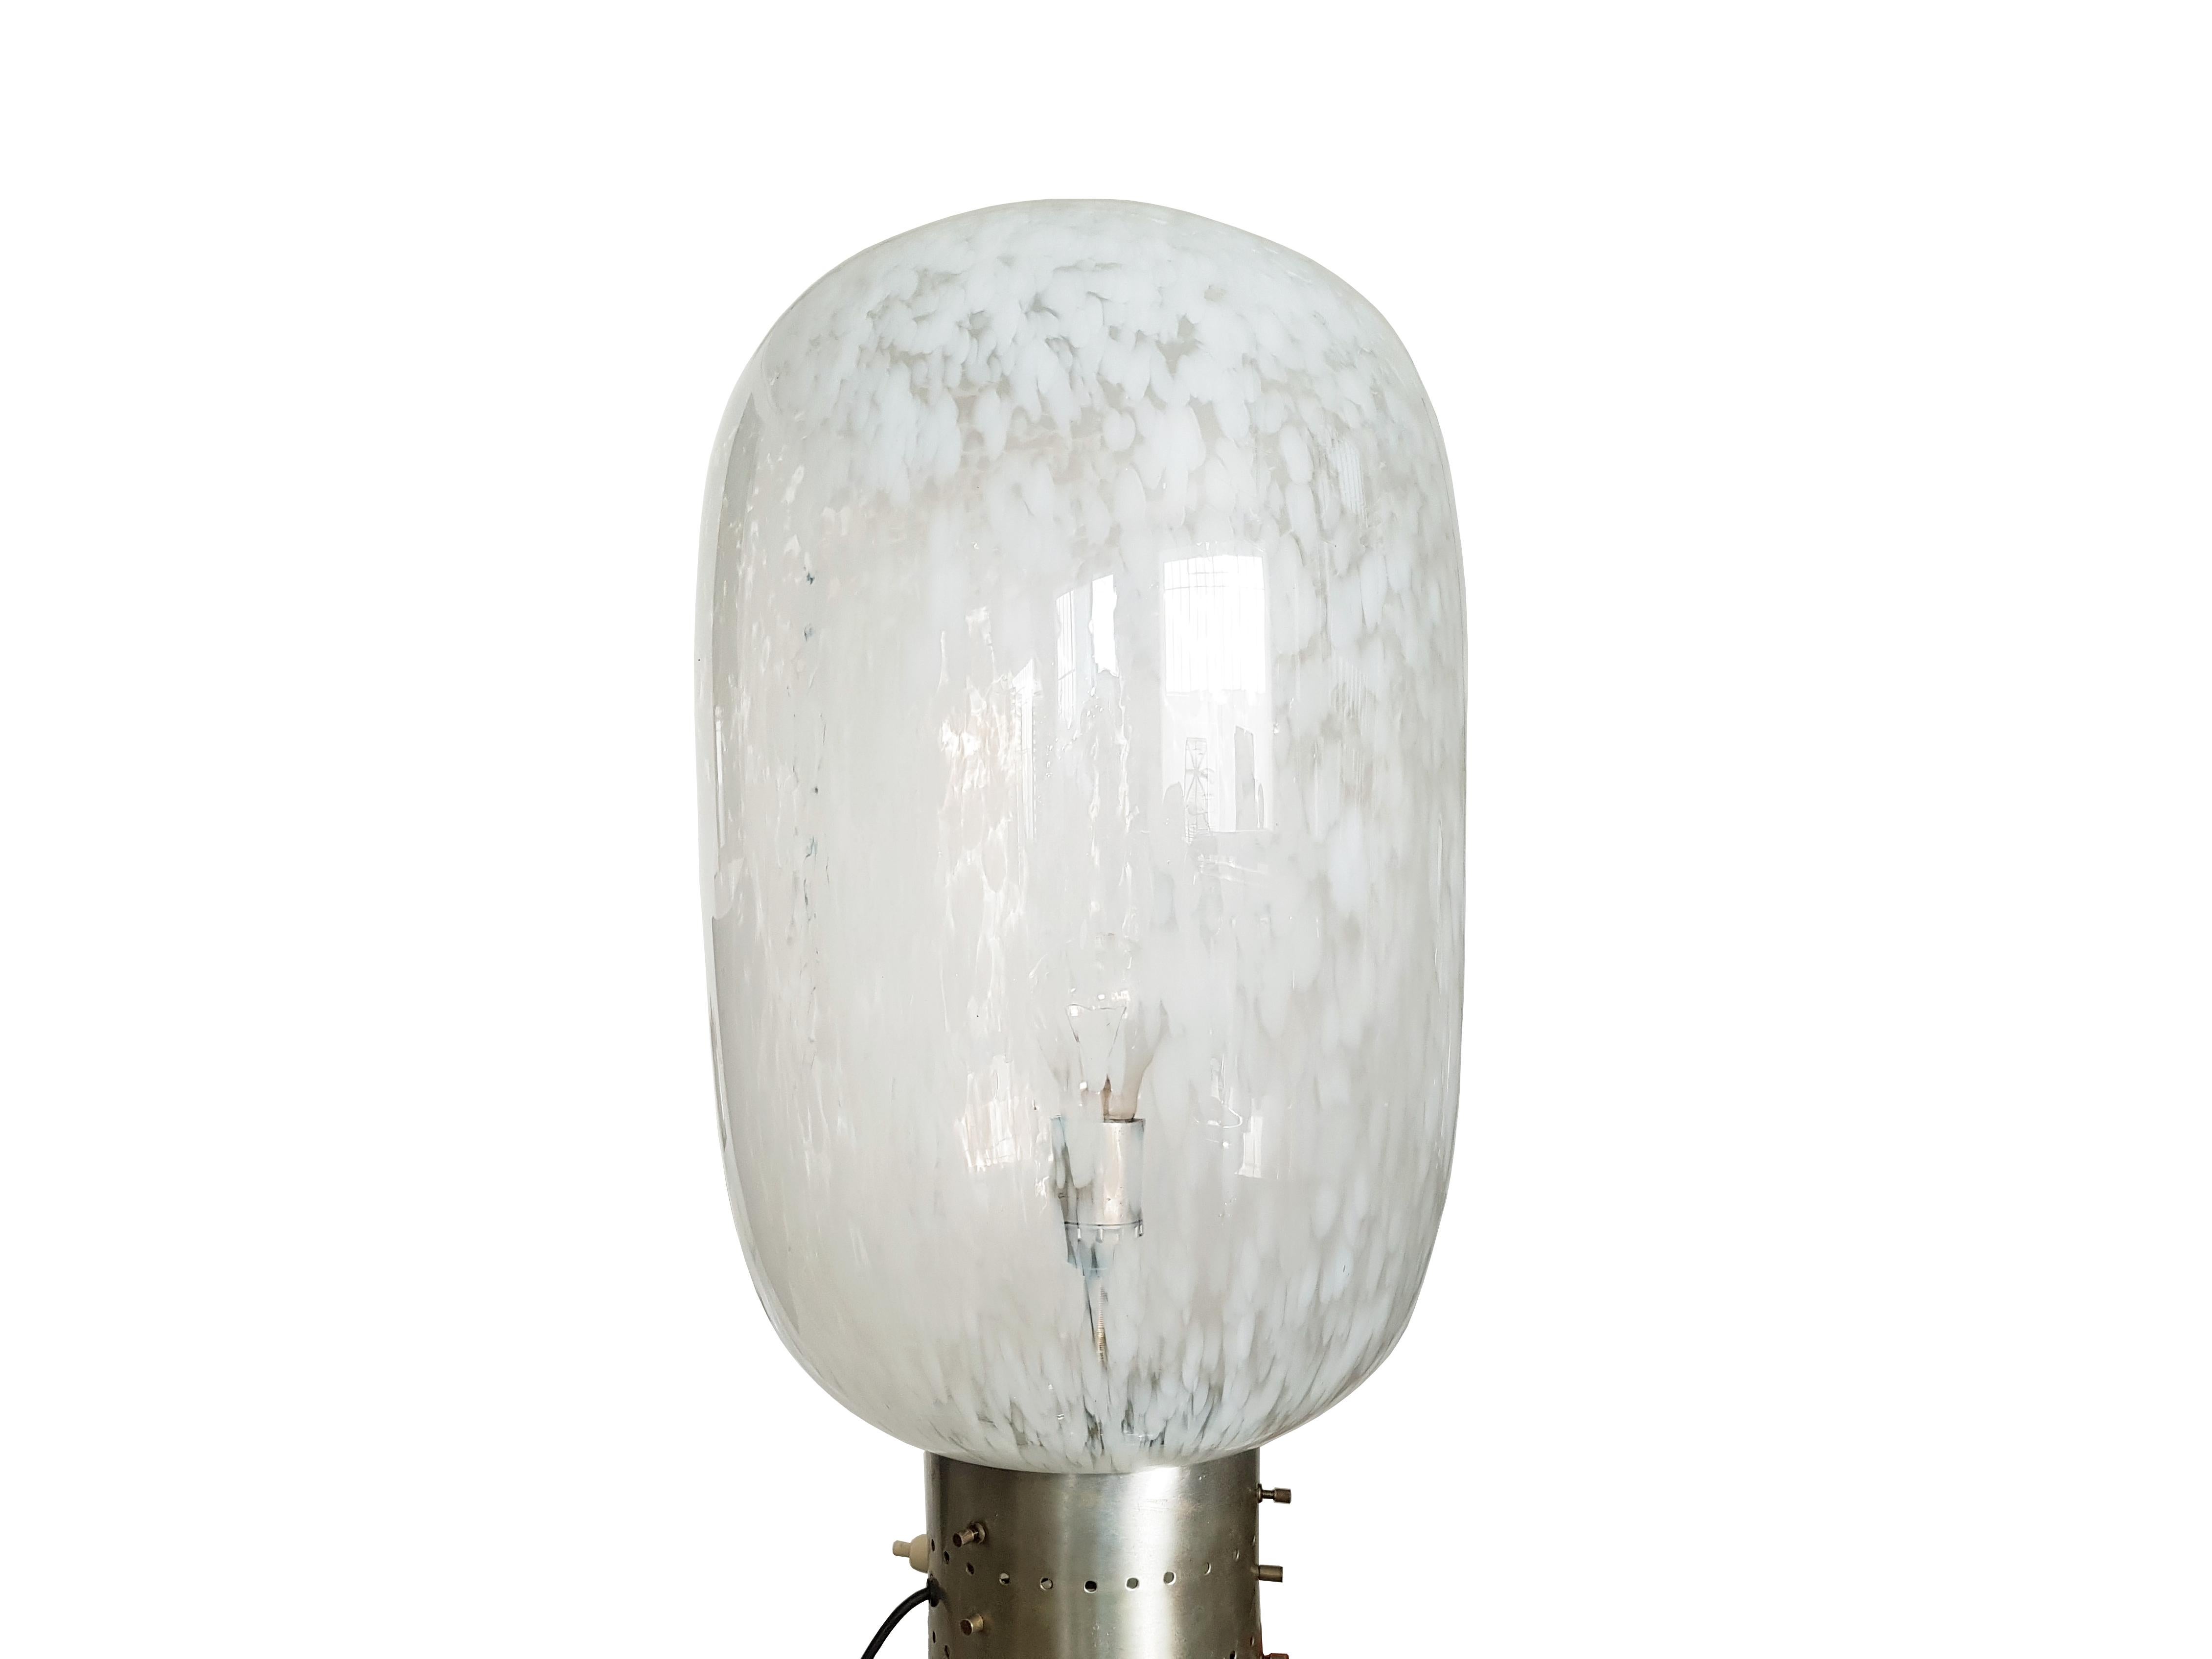 This beautiful floor lamp was produced in Italy, circa 1960s. It is made from 2 handmade Murano glass shades joint together by a cylindrical metal belt.
The lamp features 2 E27 light bulb sockets which can be switched on together or in alternate